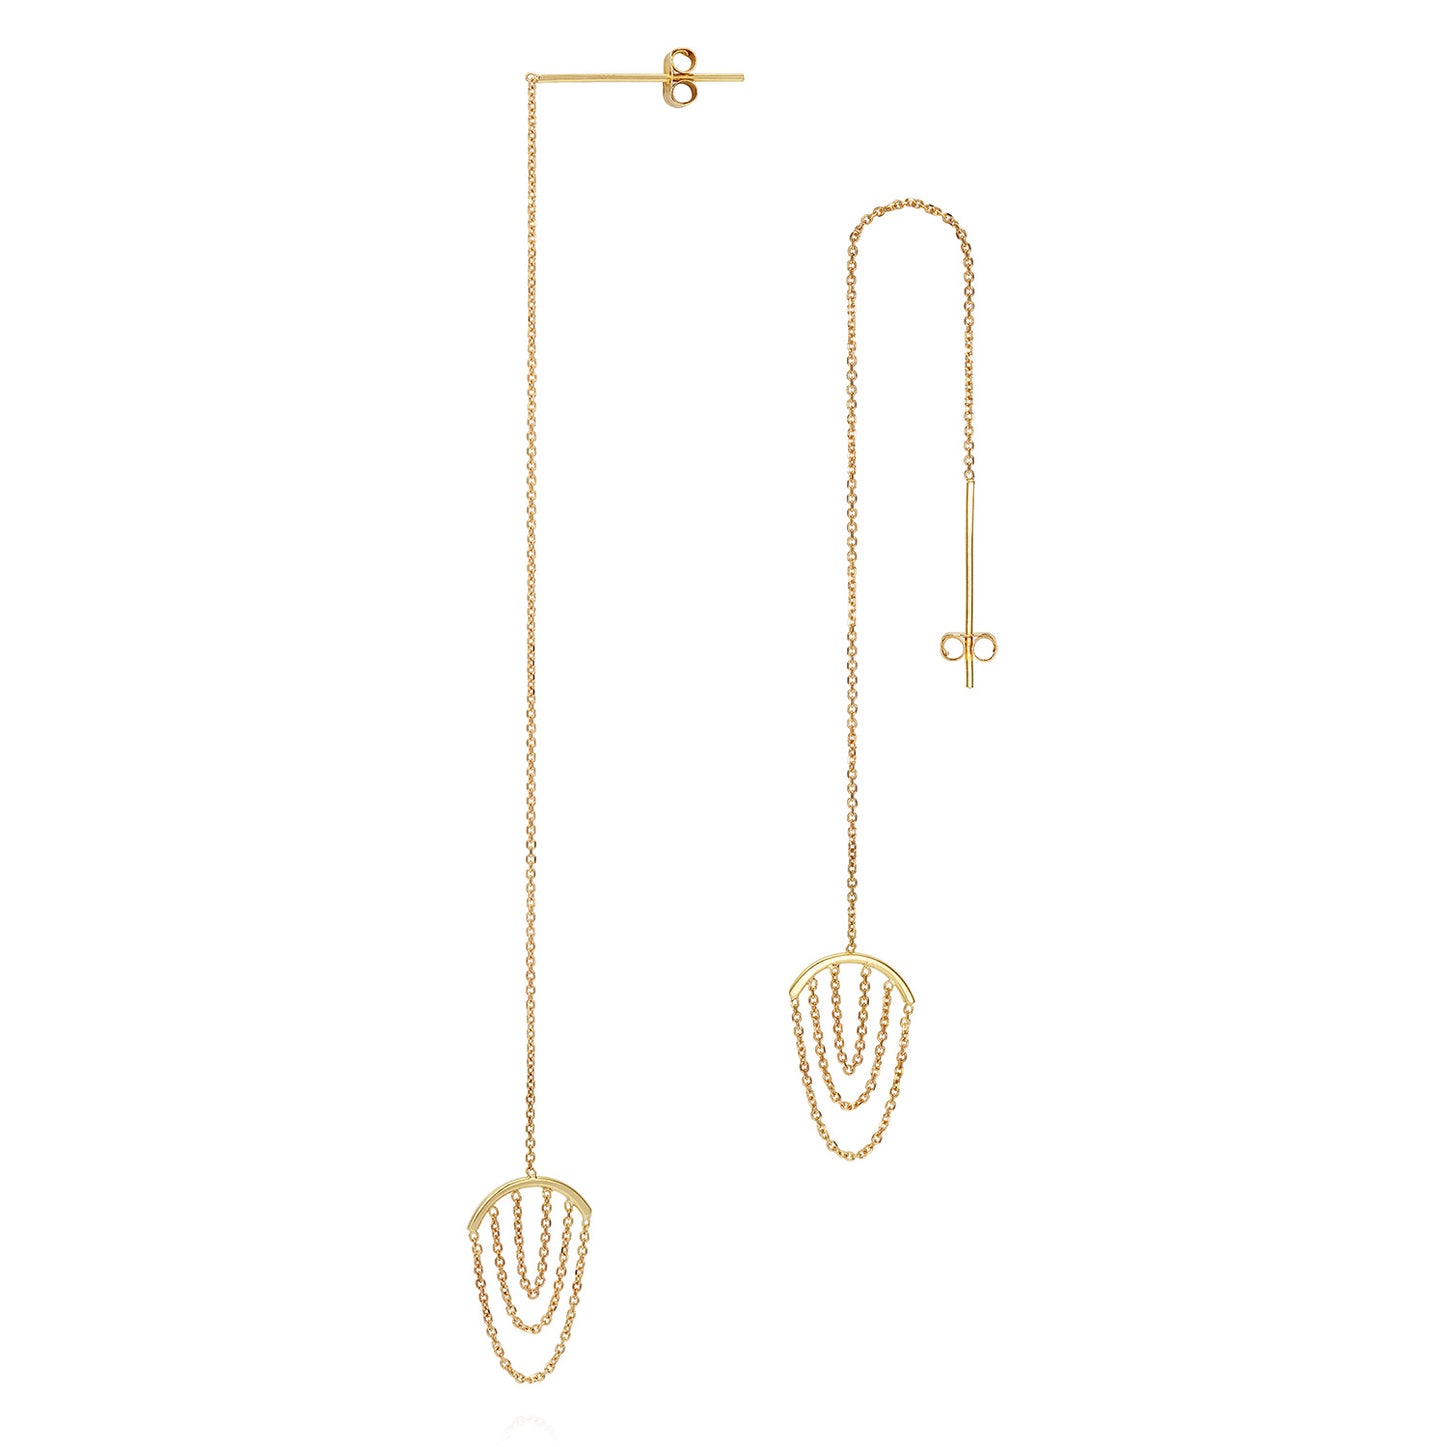 Sweet Pea 18ct yellow gold Nouveau Now thread through earrings with looped chains.